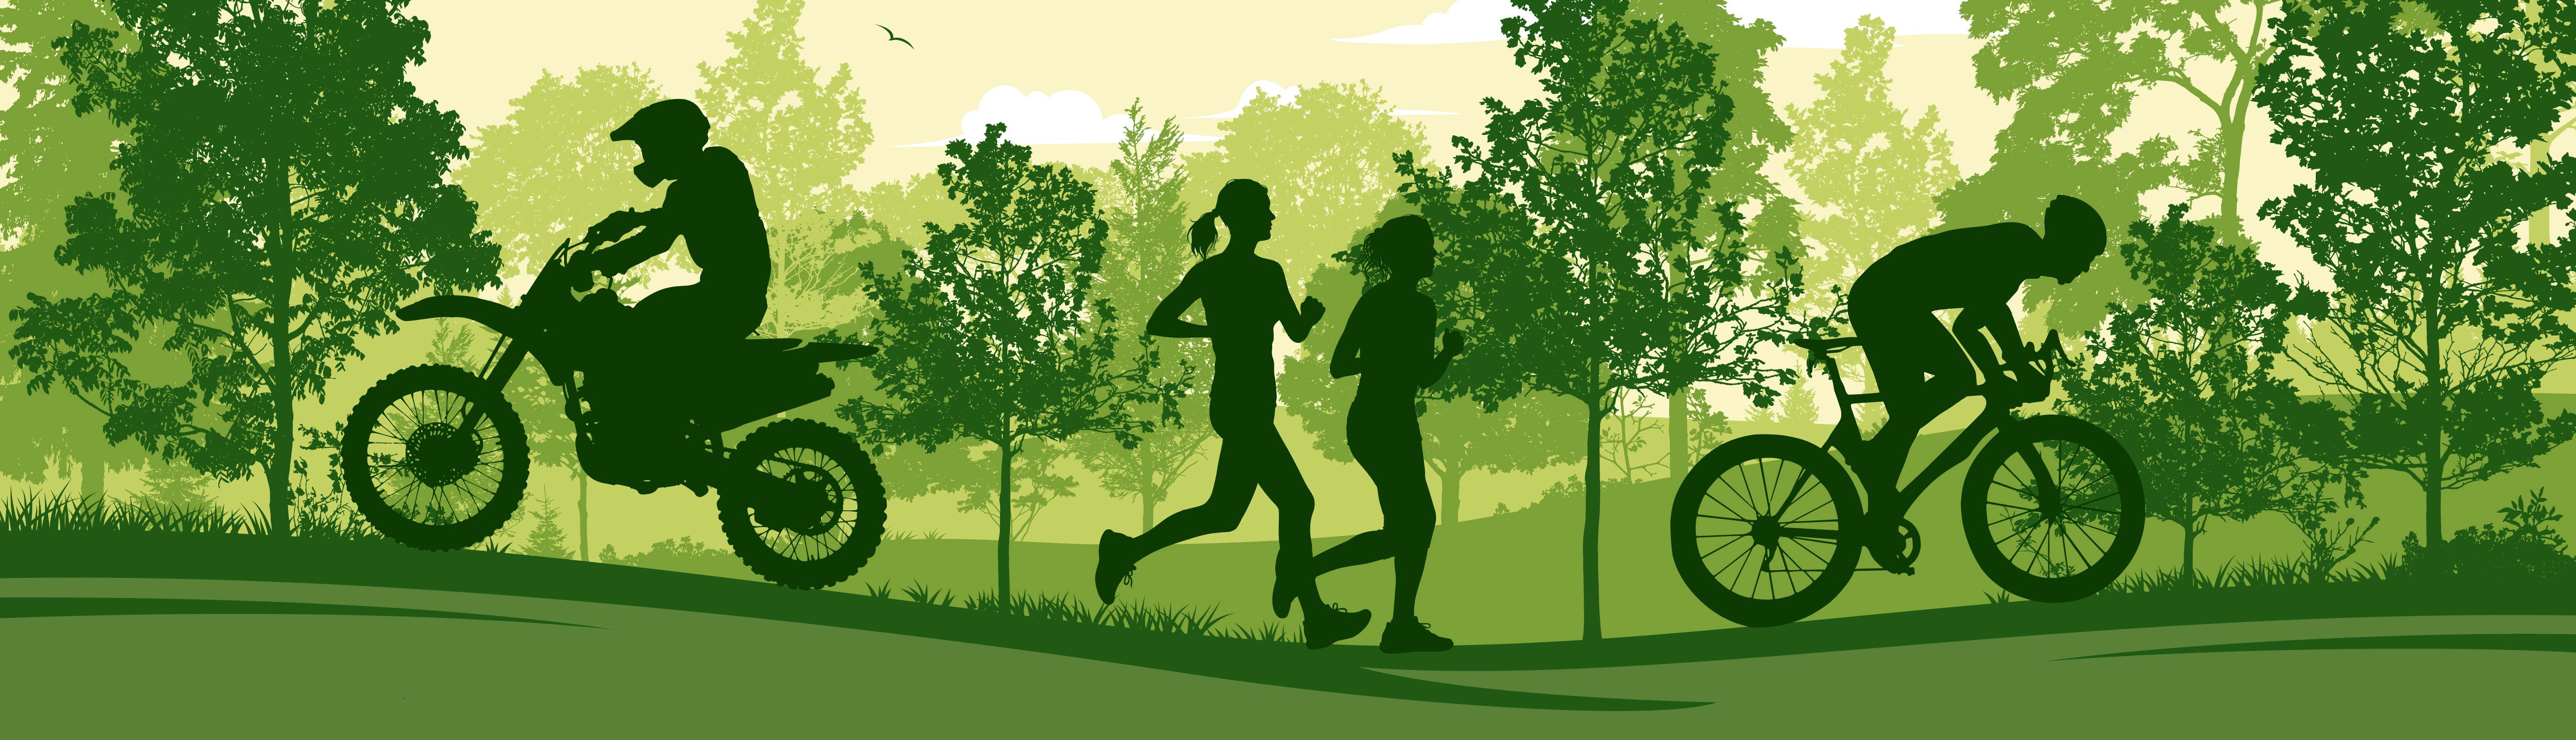 Digital illustration of runners, cyclist and motorcyclist in forest